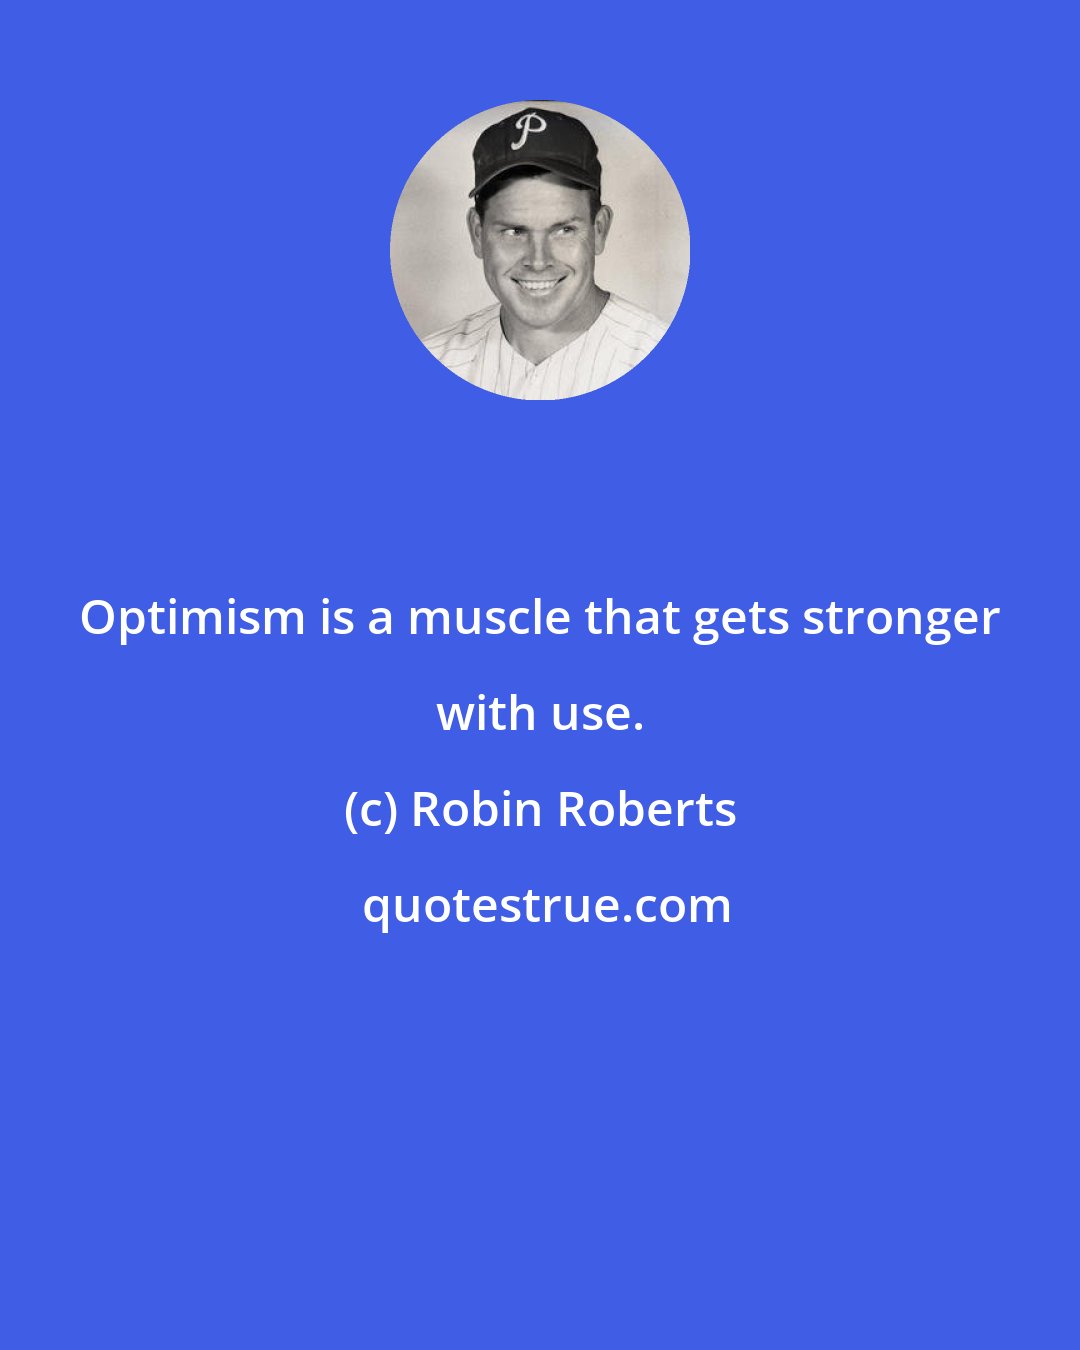 Robin Roberts: Optimism is a muscle that gets stronger with use.